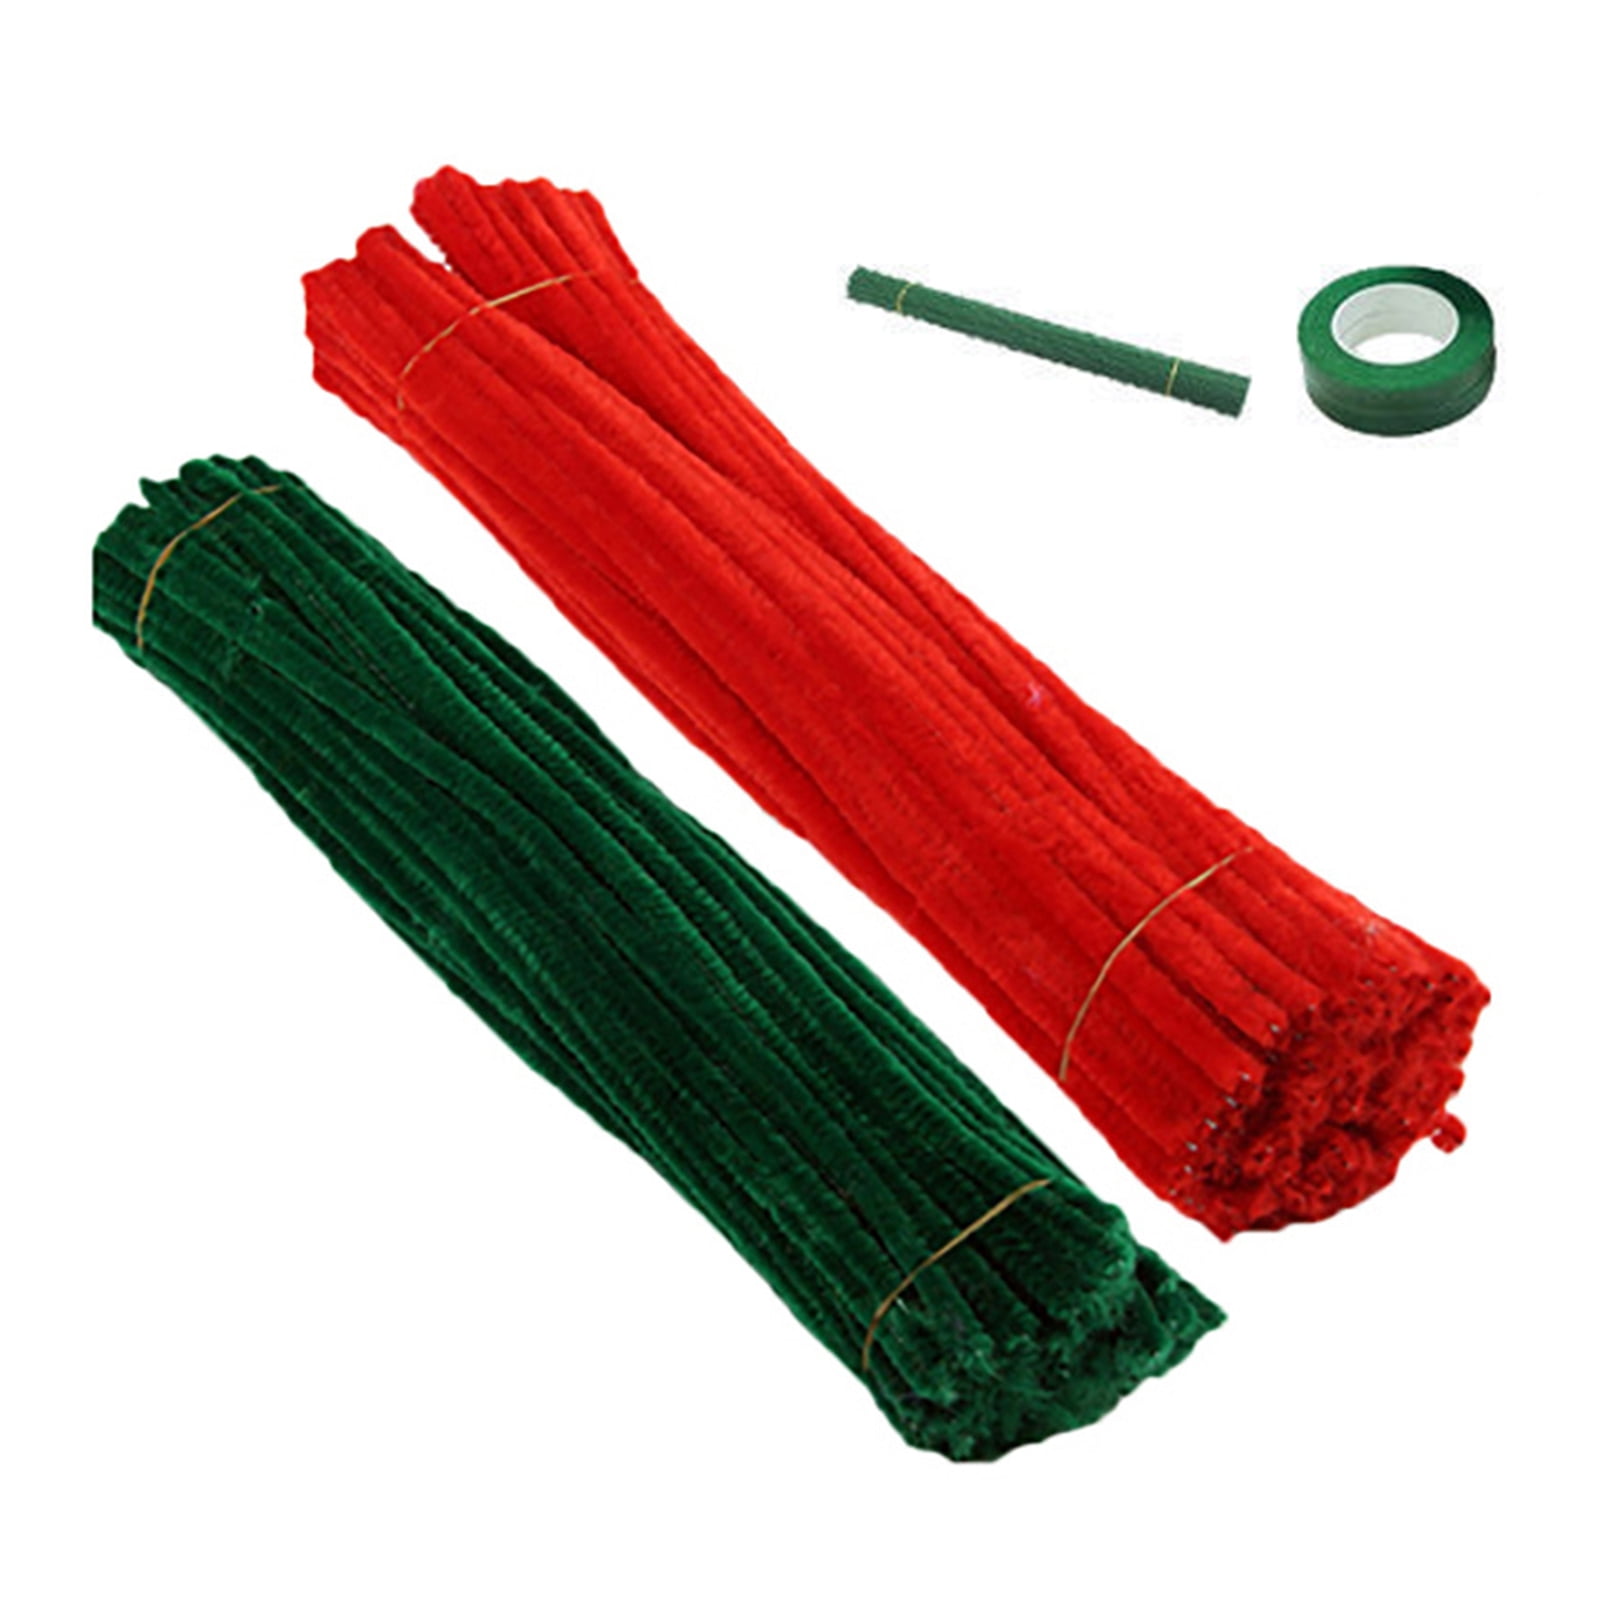 Zlulary Pipe Cleaners, Pipe Cleaners Craft Supplies, Chenille Stems Kits  for Tulip Bouquet Making with Step-by-Step Tutorials Video, Gift Box, Pipe